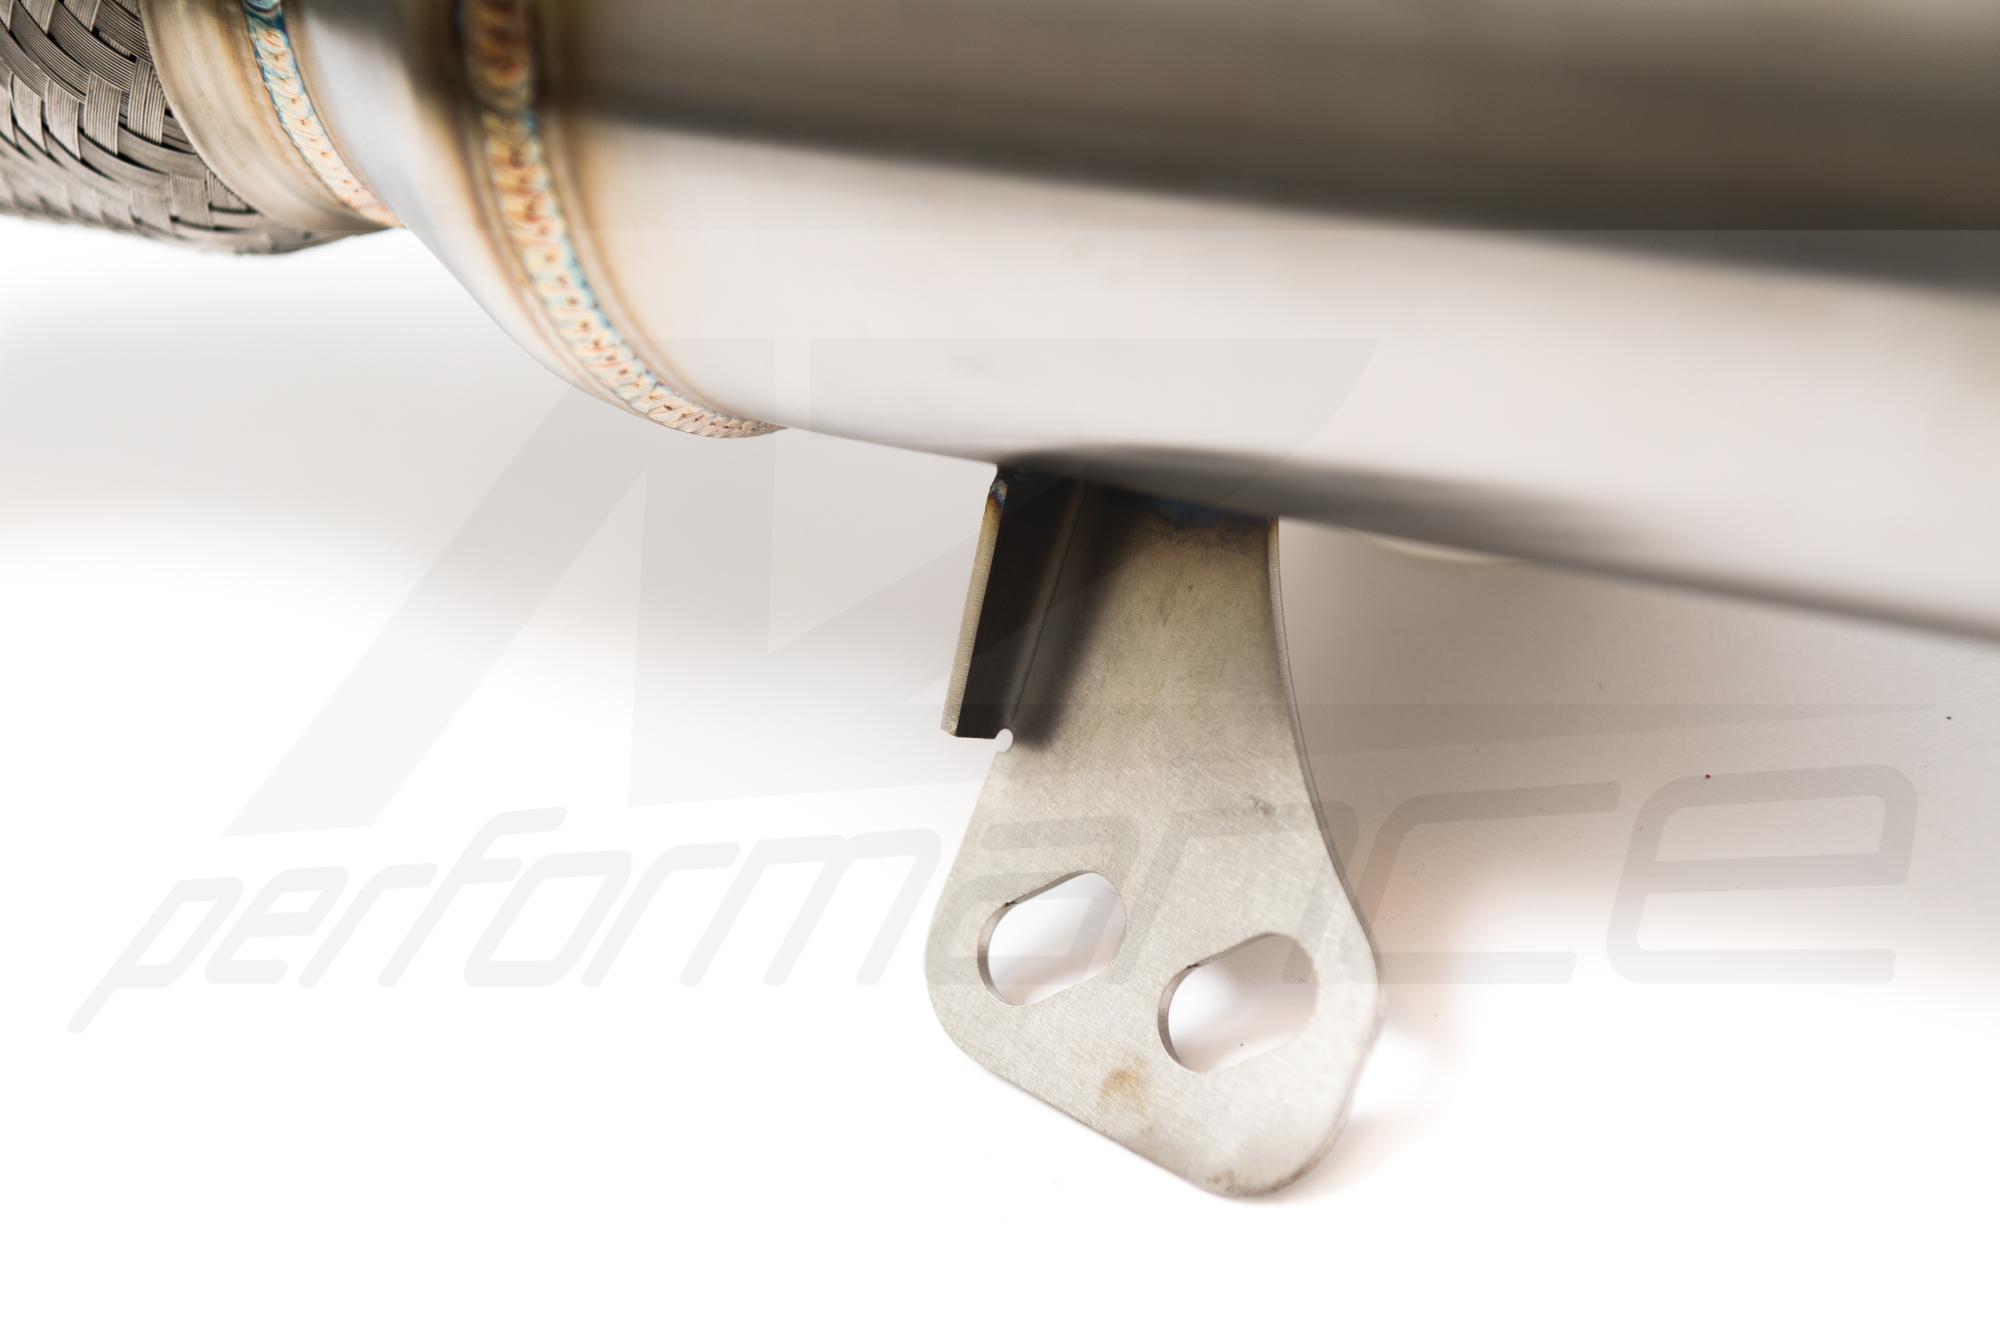 A-Zperformance 4.5˝¨Sport Exhaust Catless Downpipe for BMW B58 engines